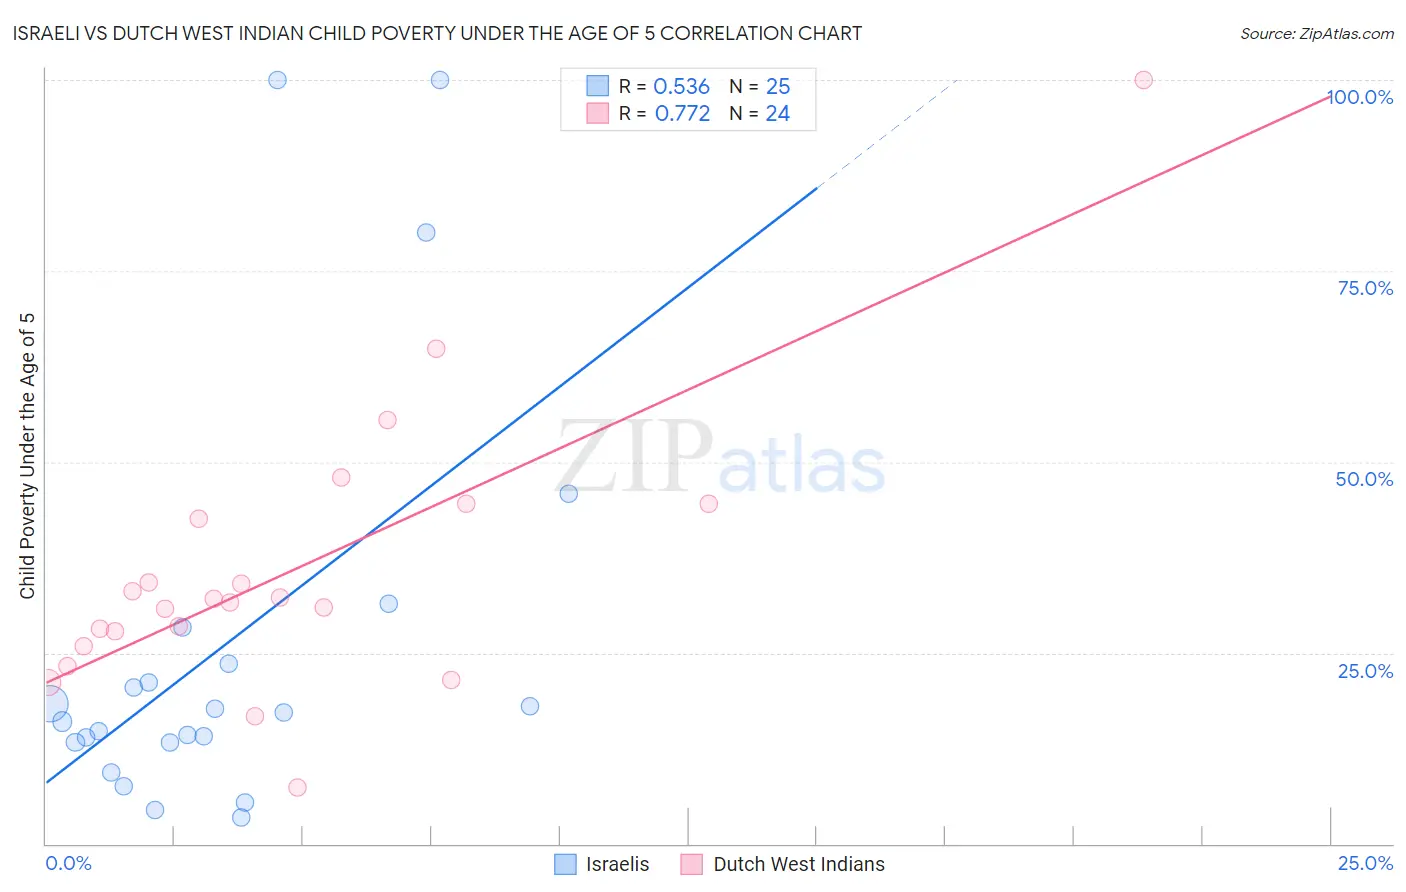 Israeli vs Dutch West Indian Child Poverty Under the Age of 5